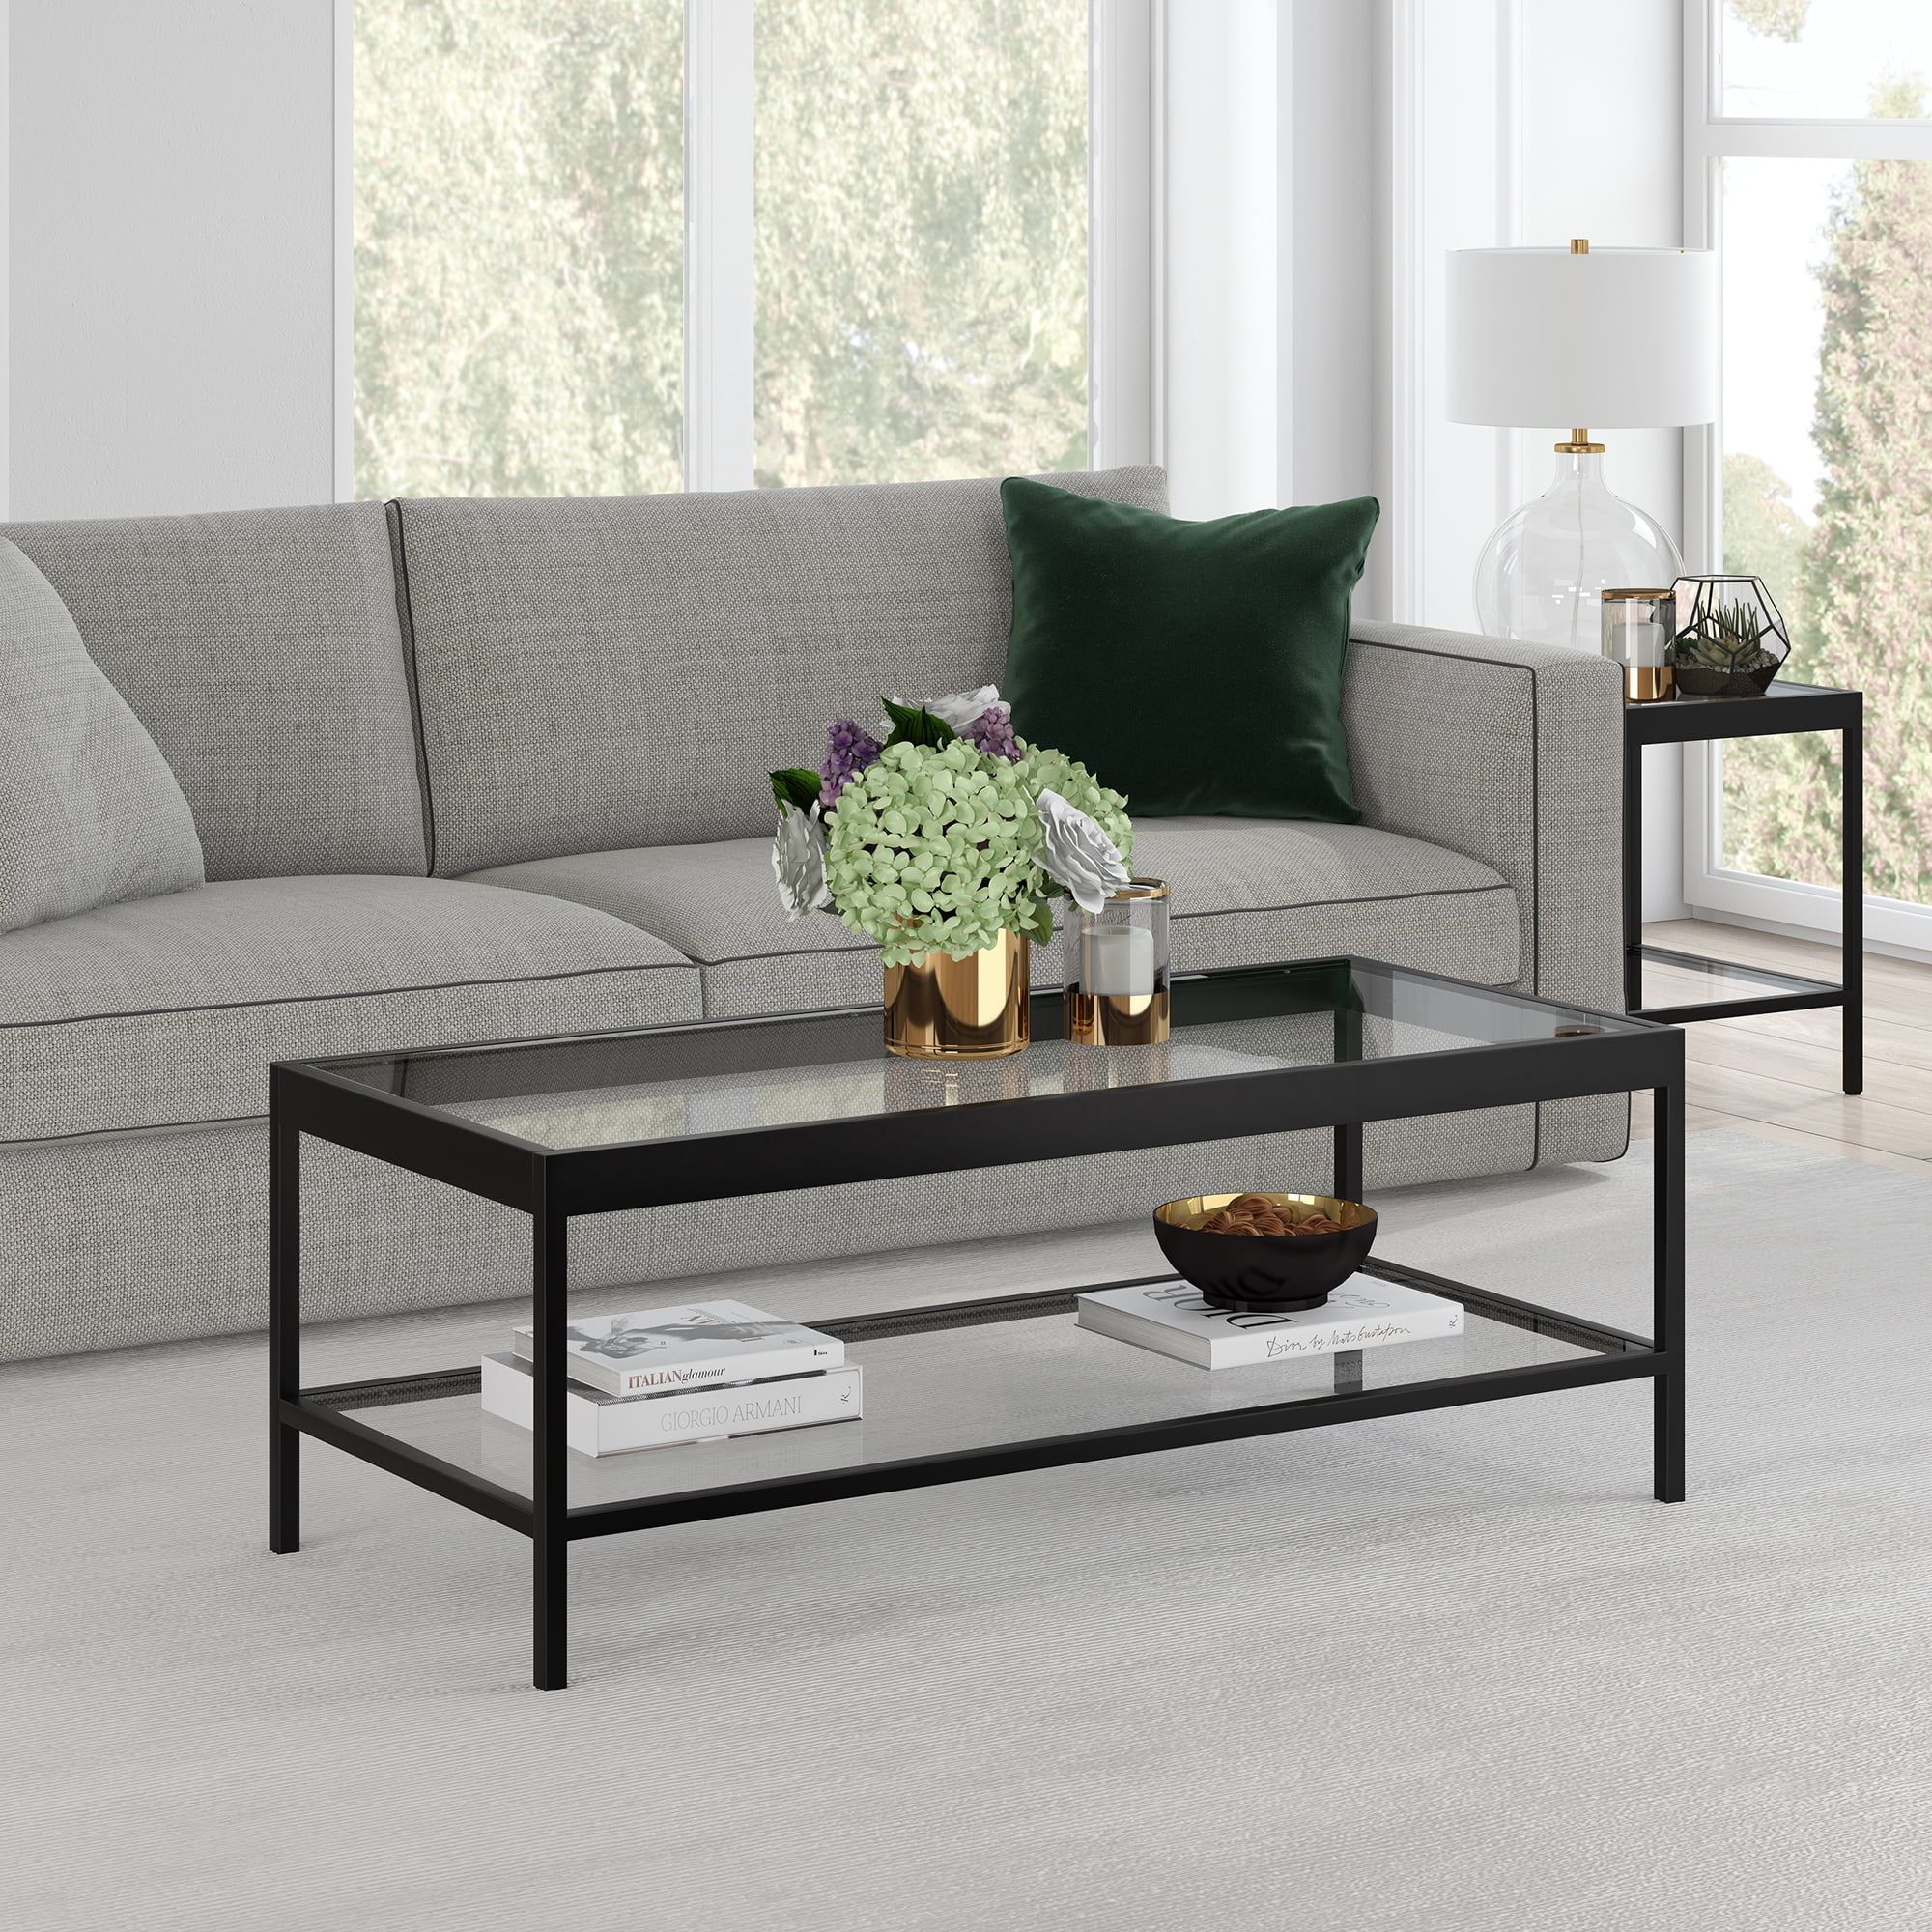 Modern Coffee Table With Open Shelf, Rectangular Table For Living Room Inside Coffee Tables With Open Storage Shelves (View 5 of 20)